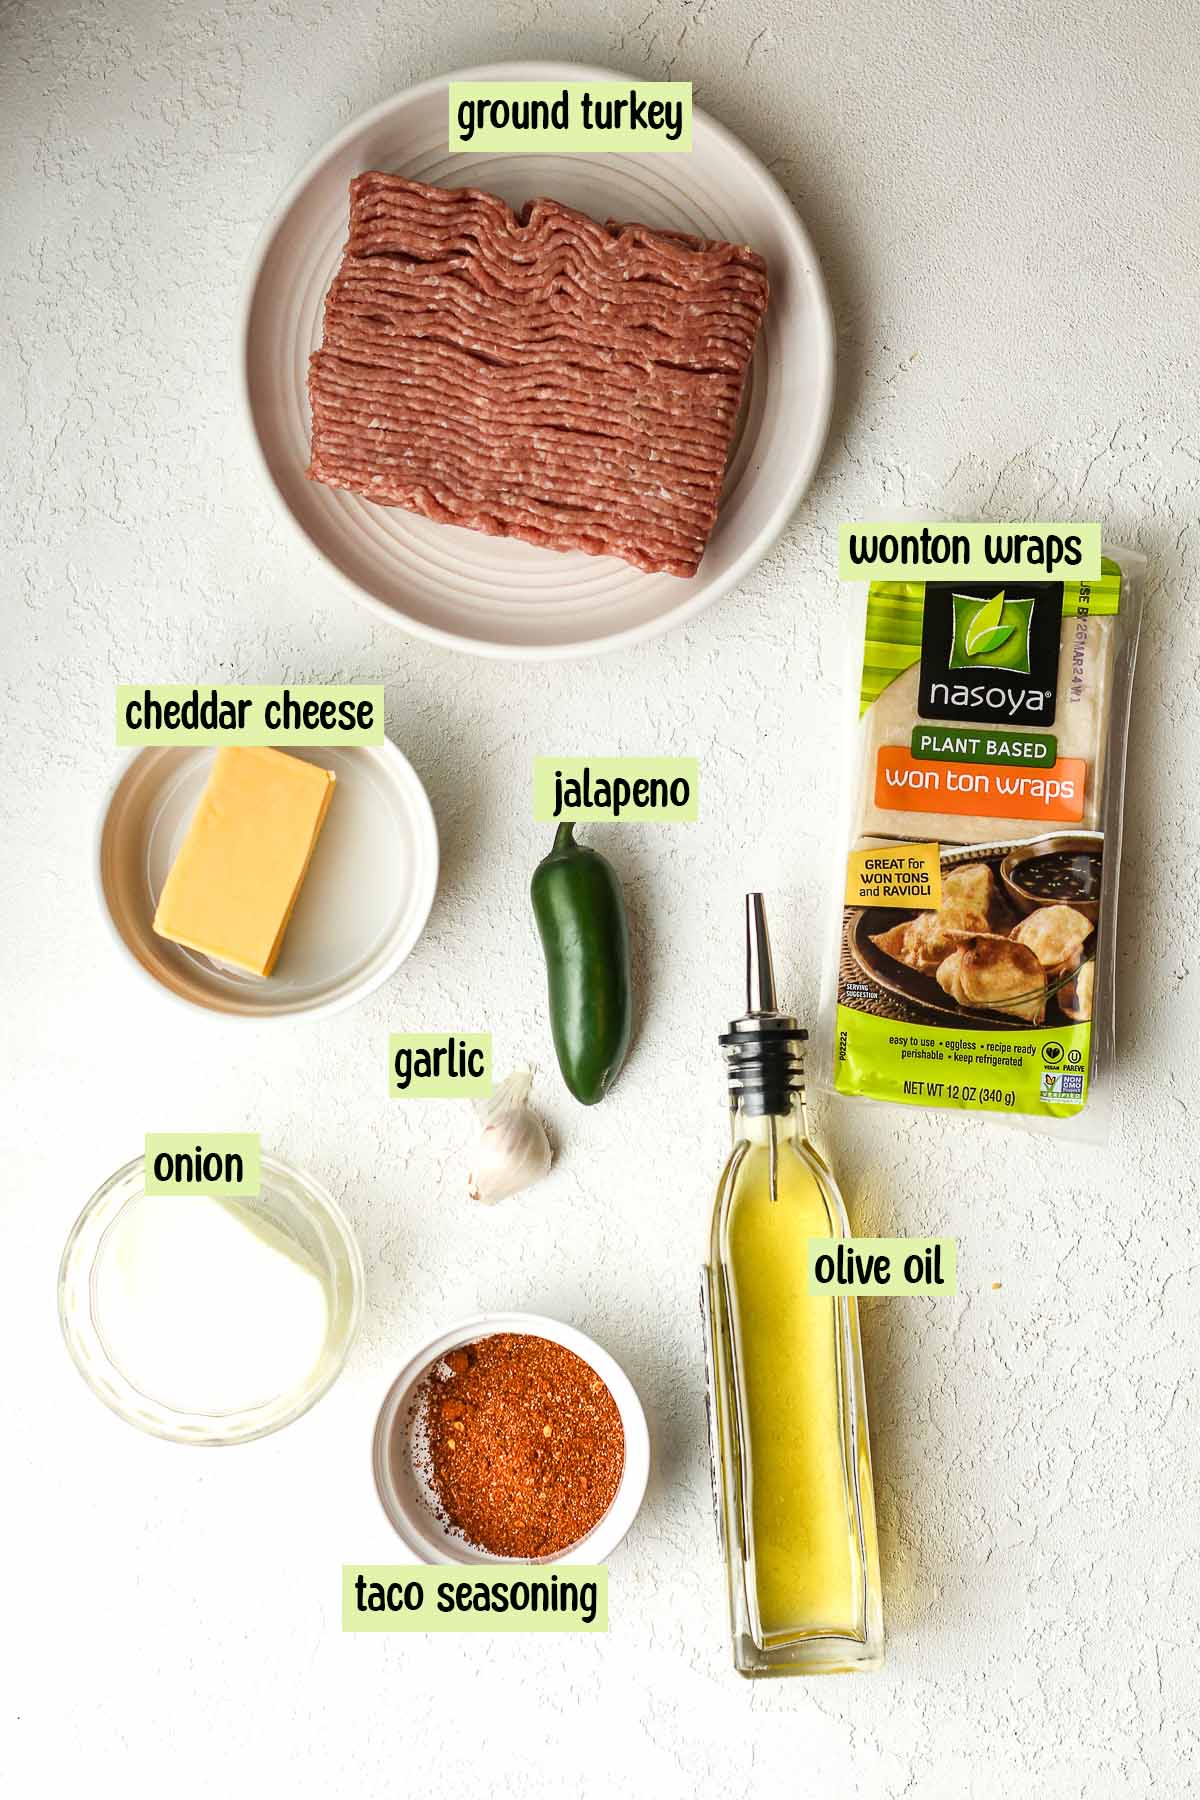 The labeled ingredients for wonton taco cups.